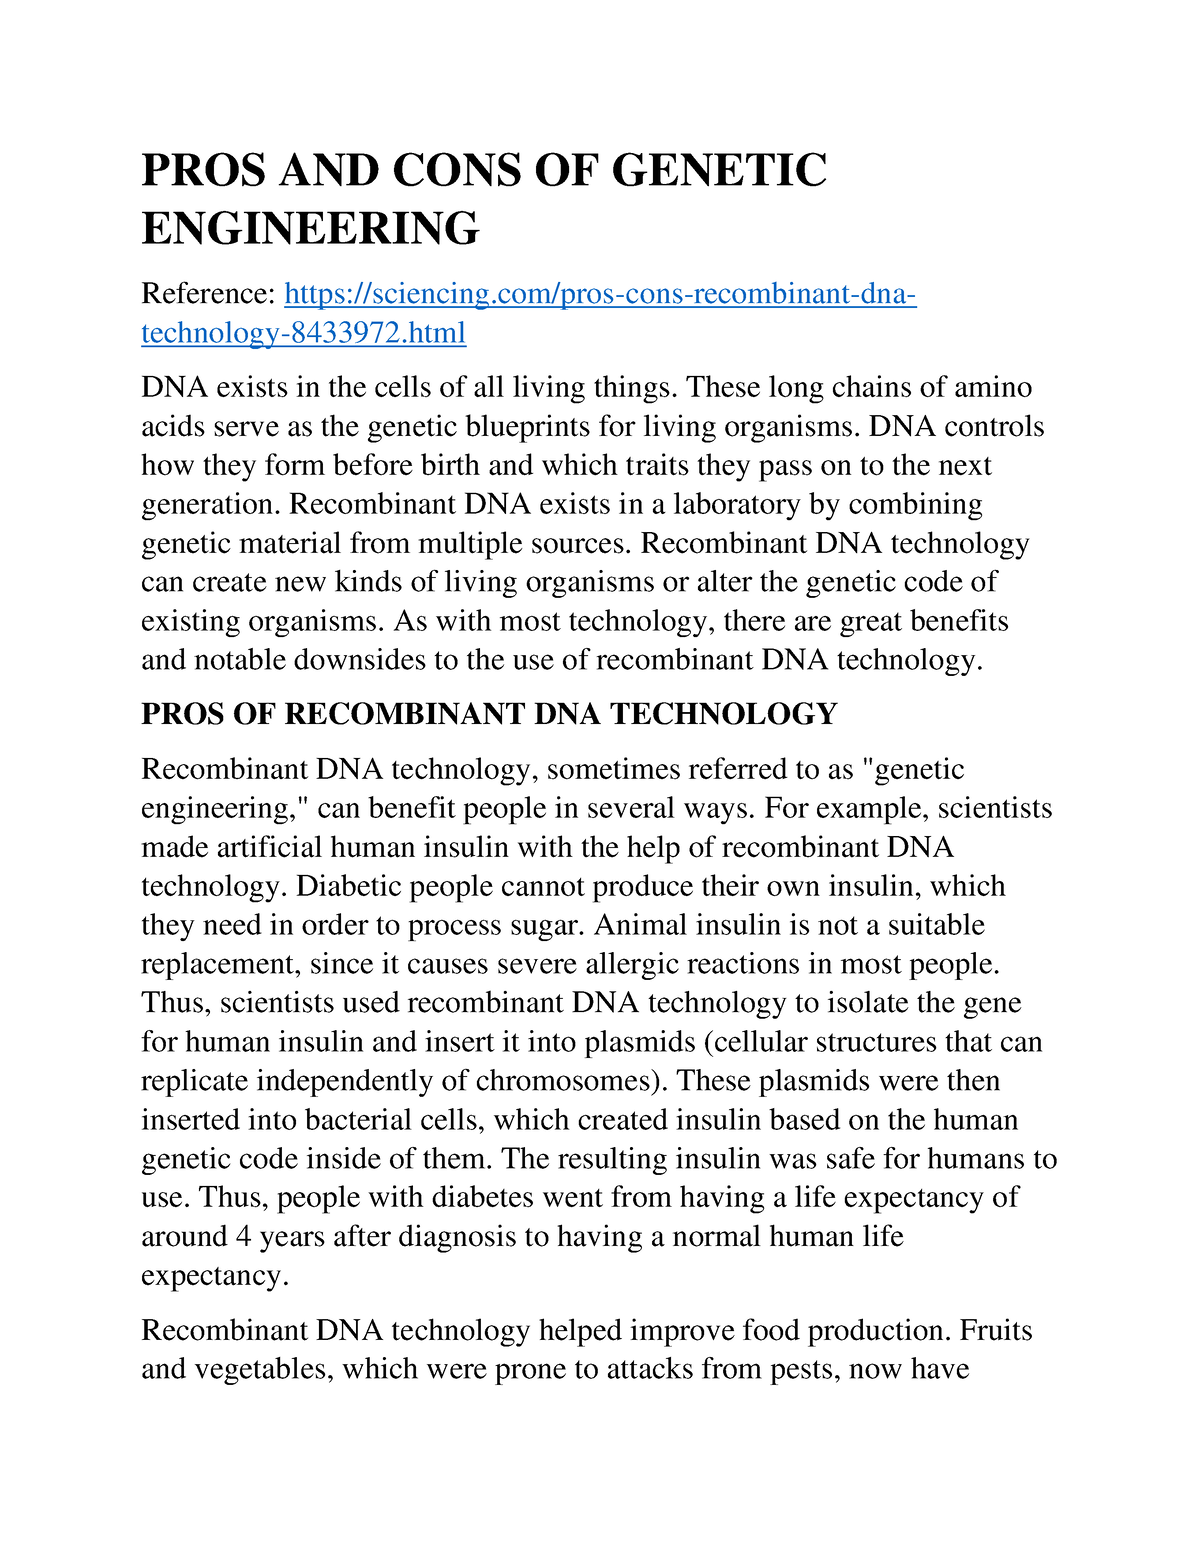 genetic engineering pros and cons essay